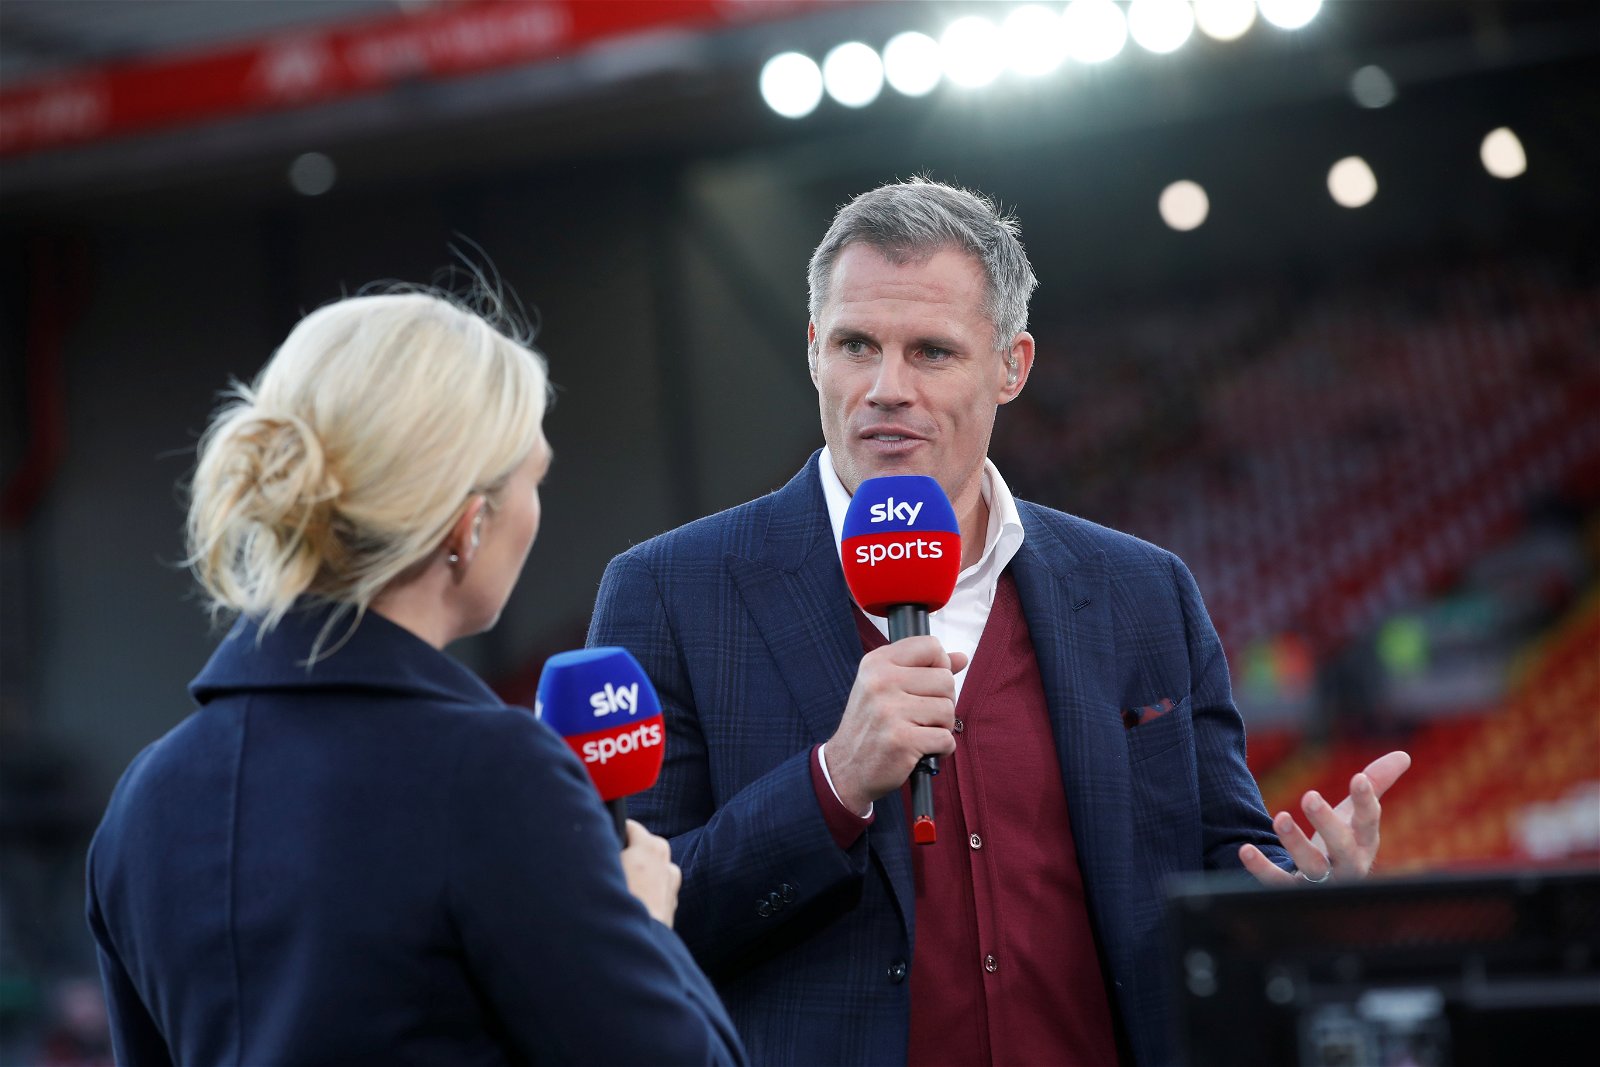 Manchester United unlikely to get into Europe next season : Carragher